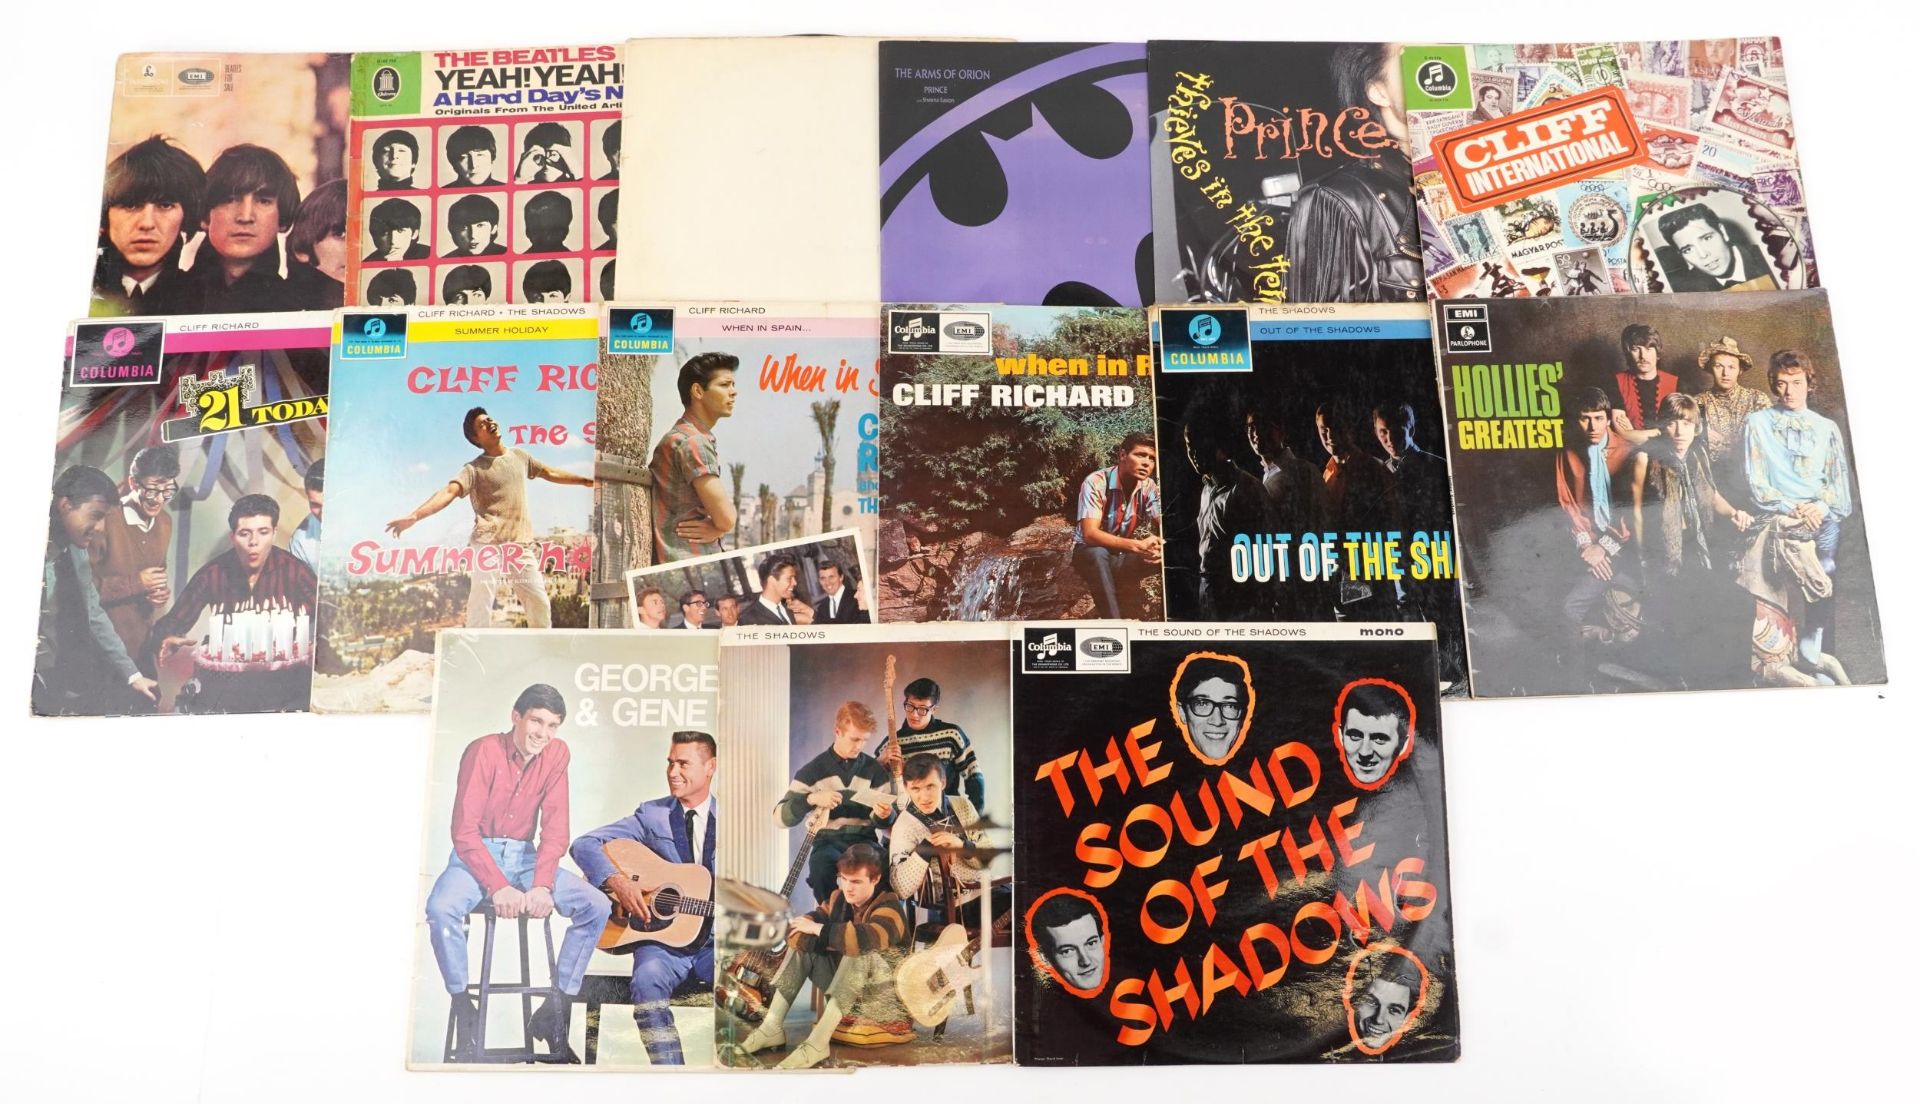 Vinyl LP records including The Beatles and Cliff Richard : For further information on this lot